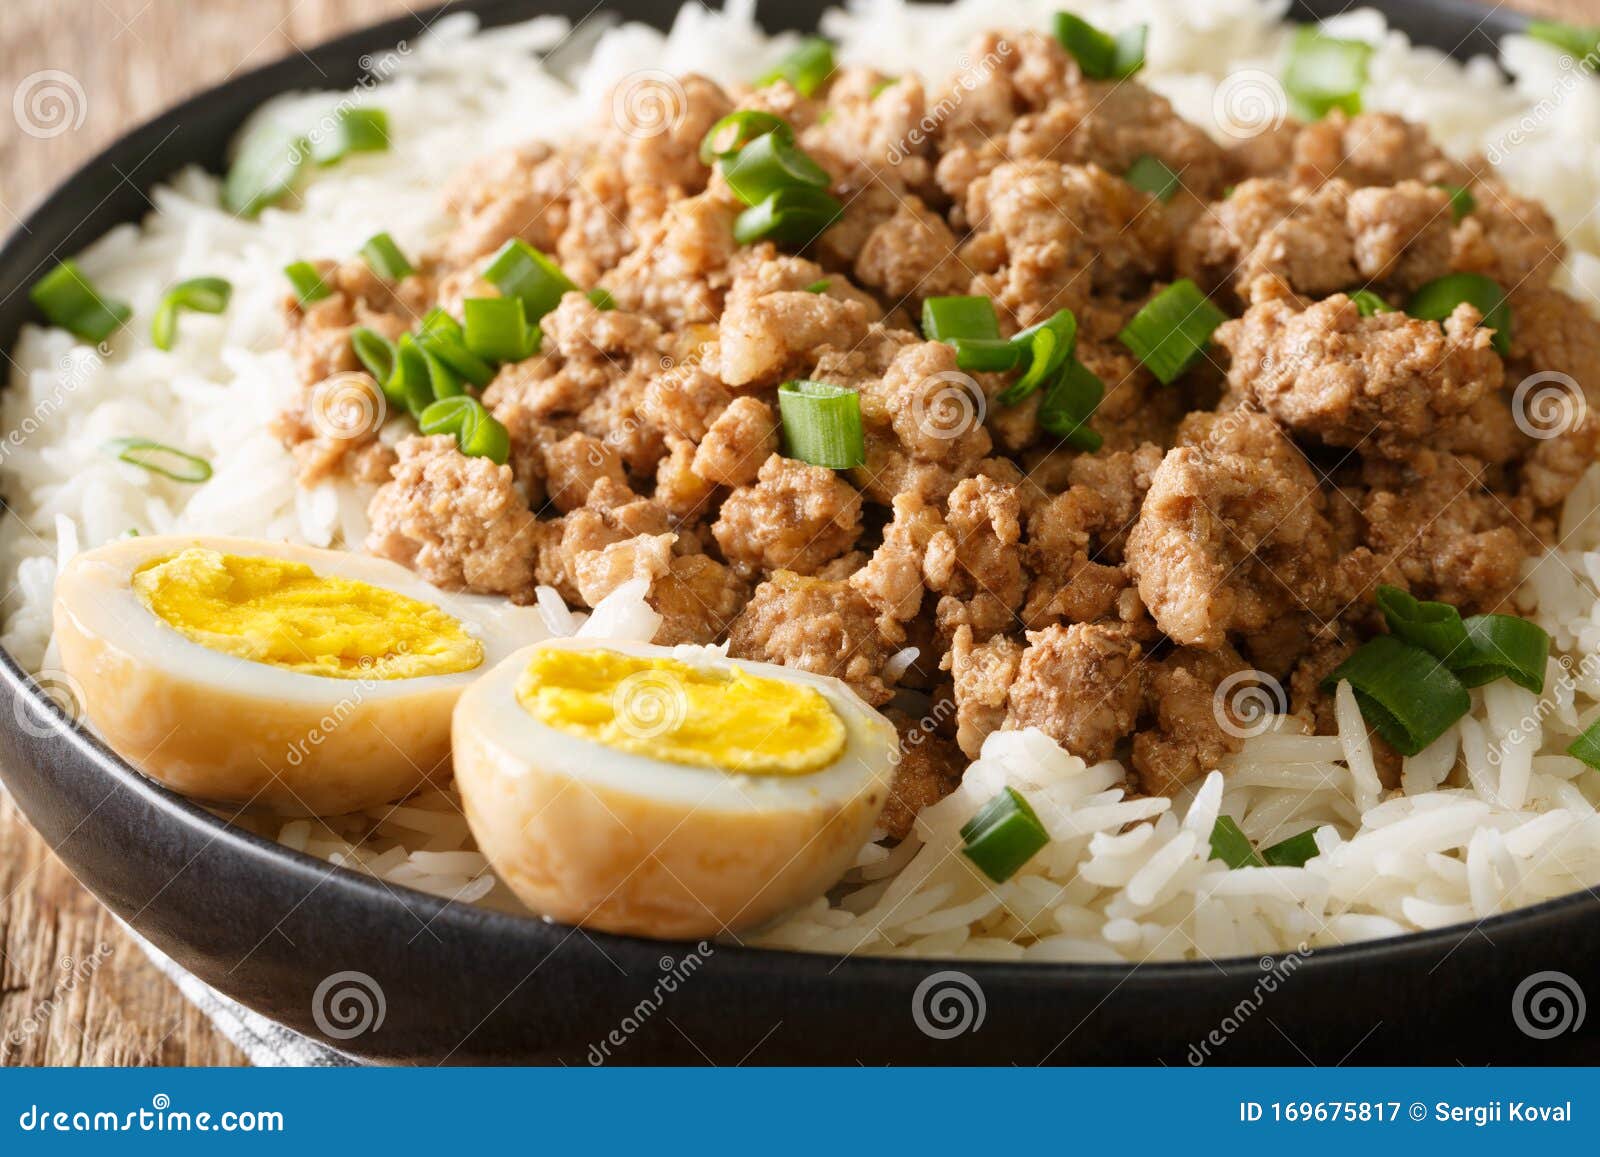 Lu Rou Fan Taiwanese Braised Pork Rice Bowl Ground Pork Served On Top Of Steamed Rice Close Up In A Plate Horizontal Stock Image Image Of Ground Dish